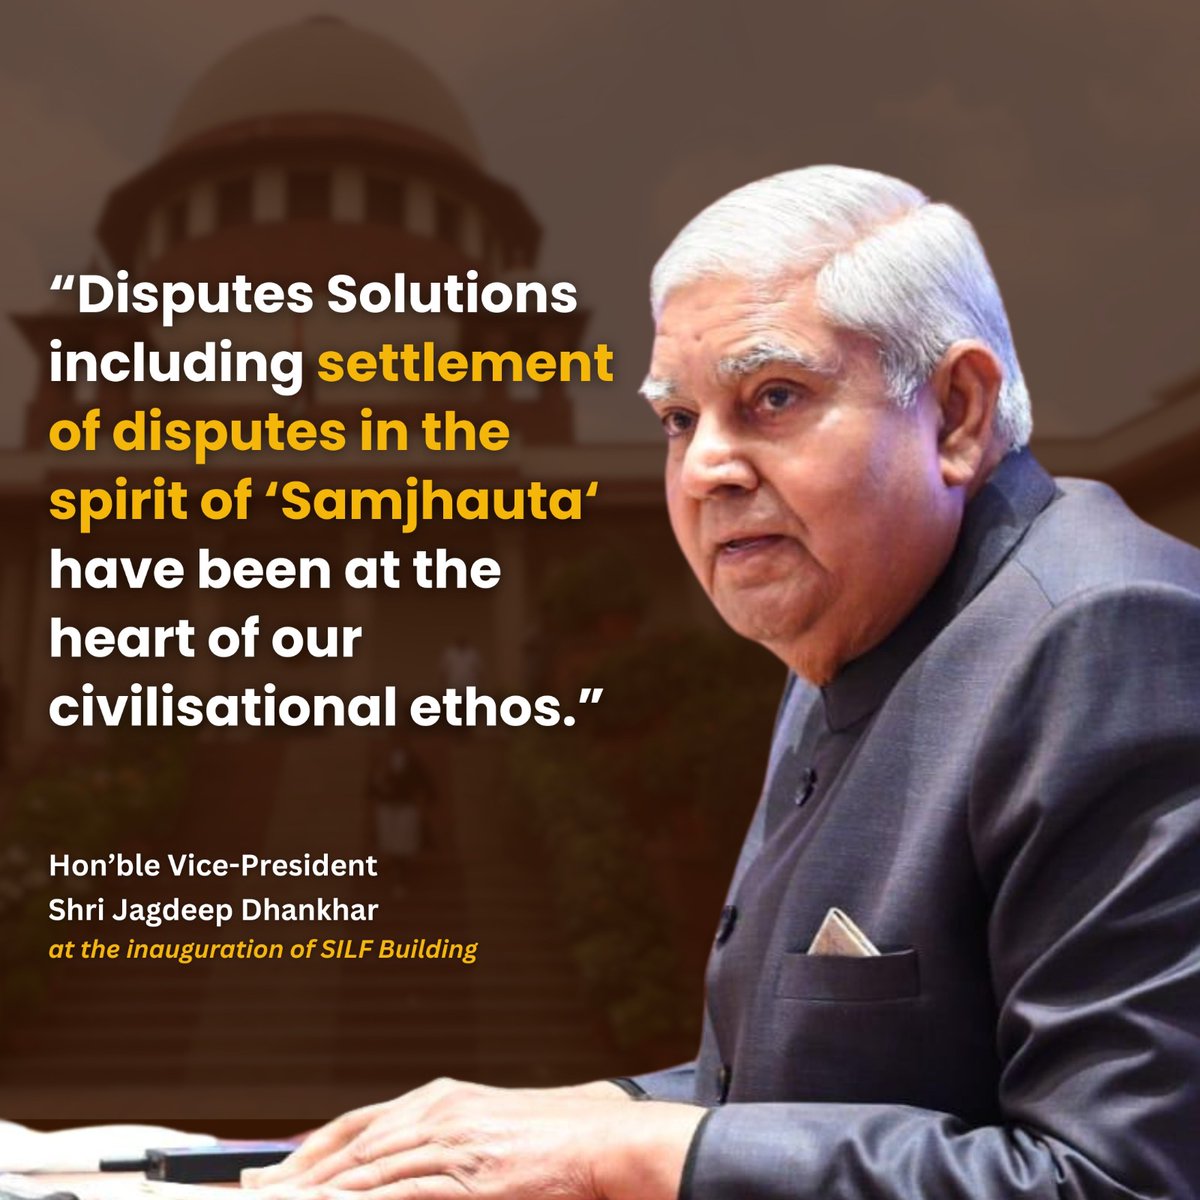 Disputes solutions, including settlement of disputes in the spirit of 'Samjhauta', have been at the heart of our civilisational ethos. #SILF